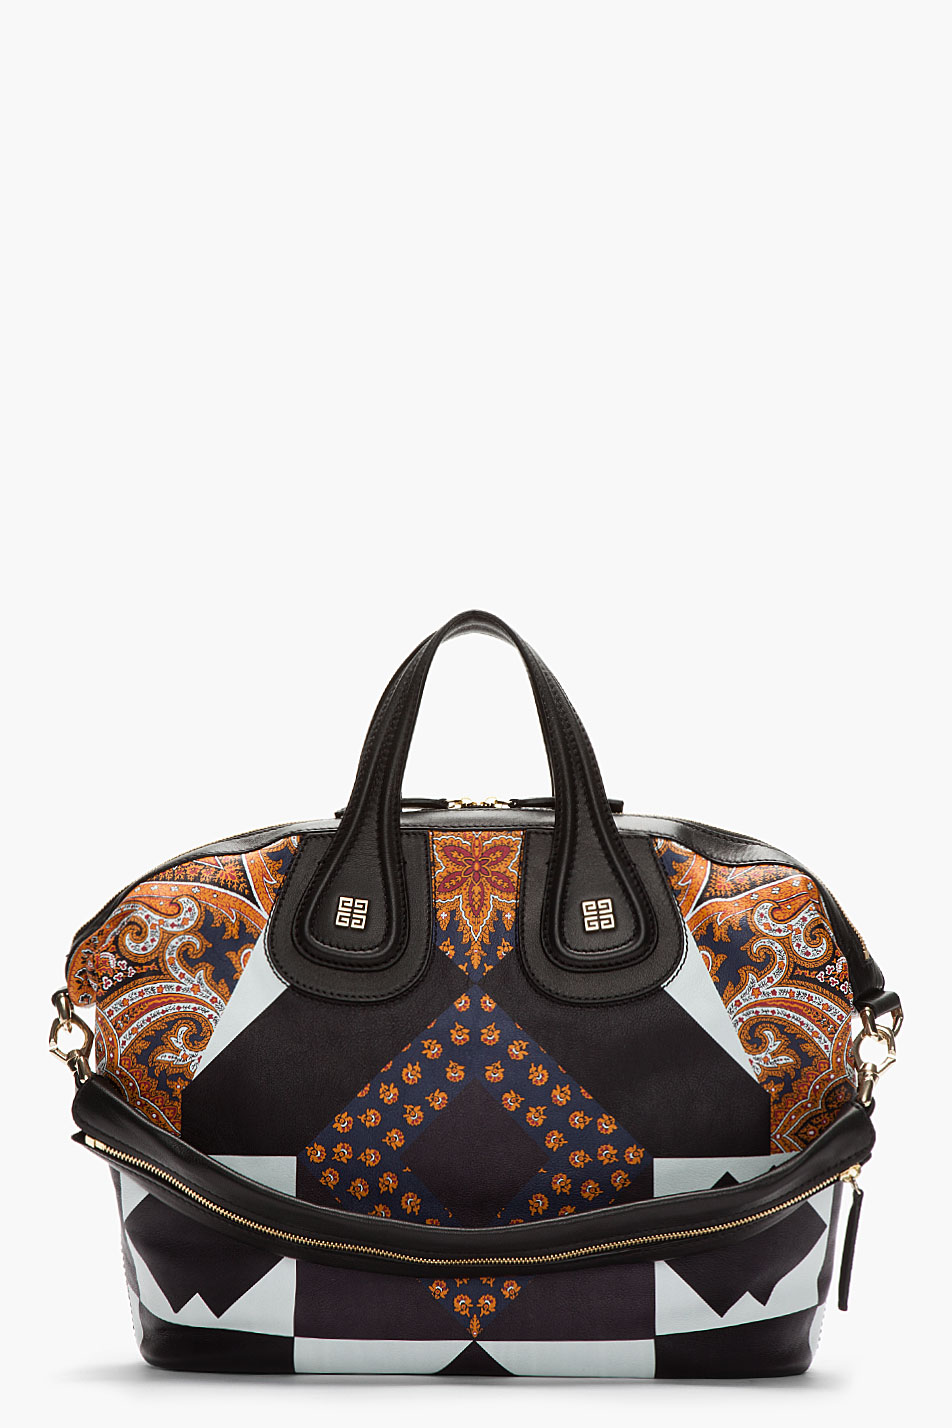 Lyst - Givenchy Paisley Leather Bag in Black